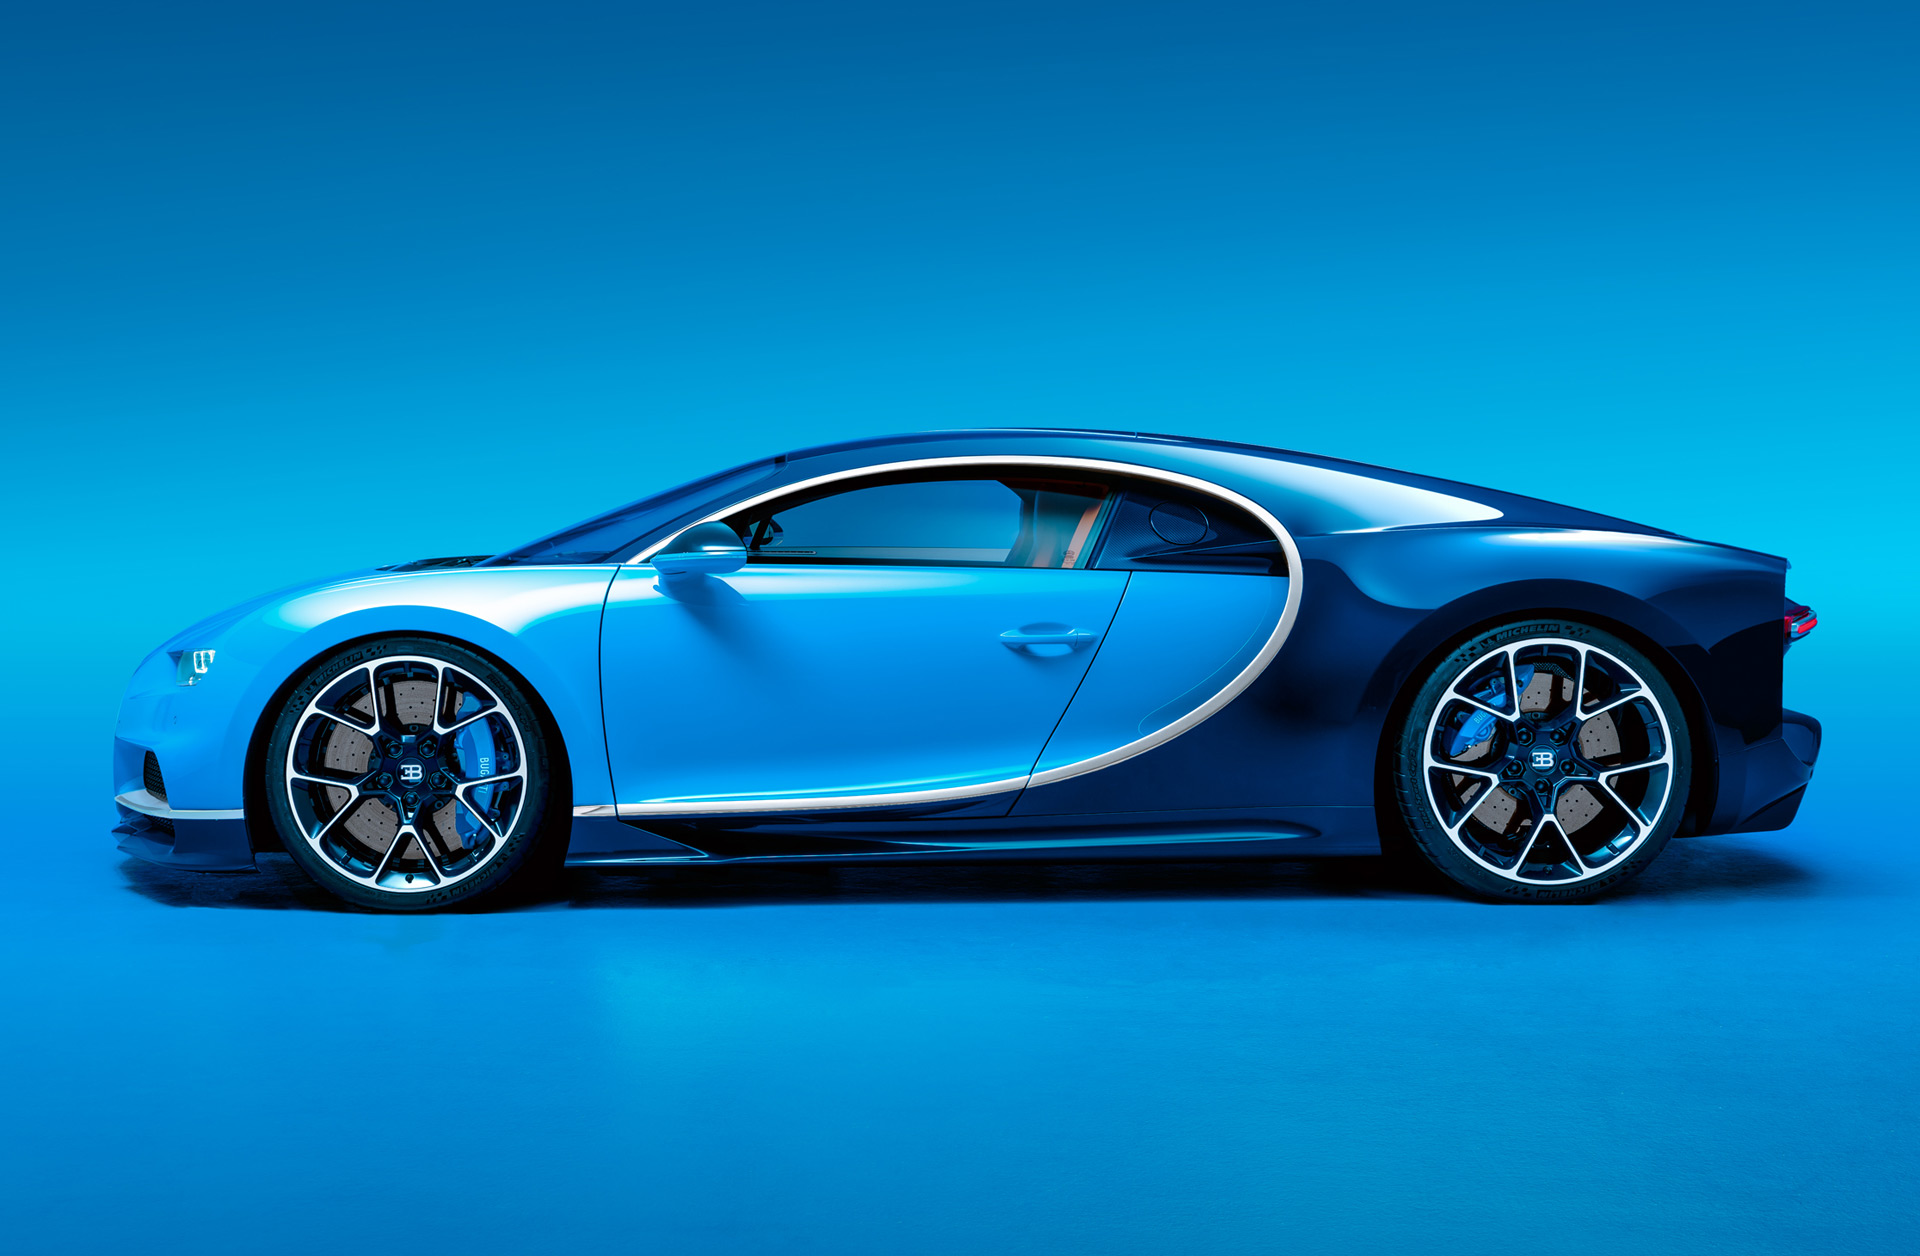 Why the Bugatti Chiron looks the way it does